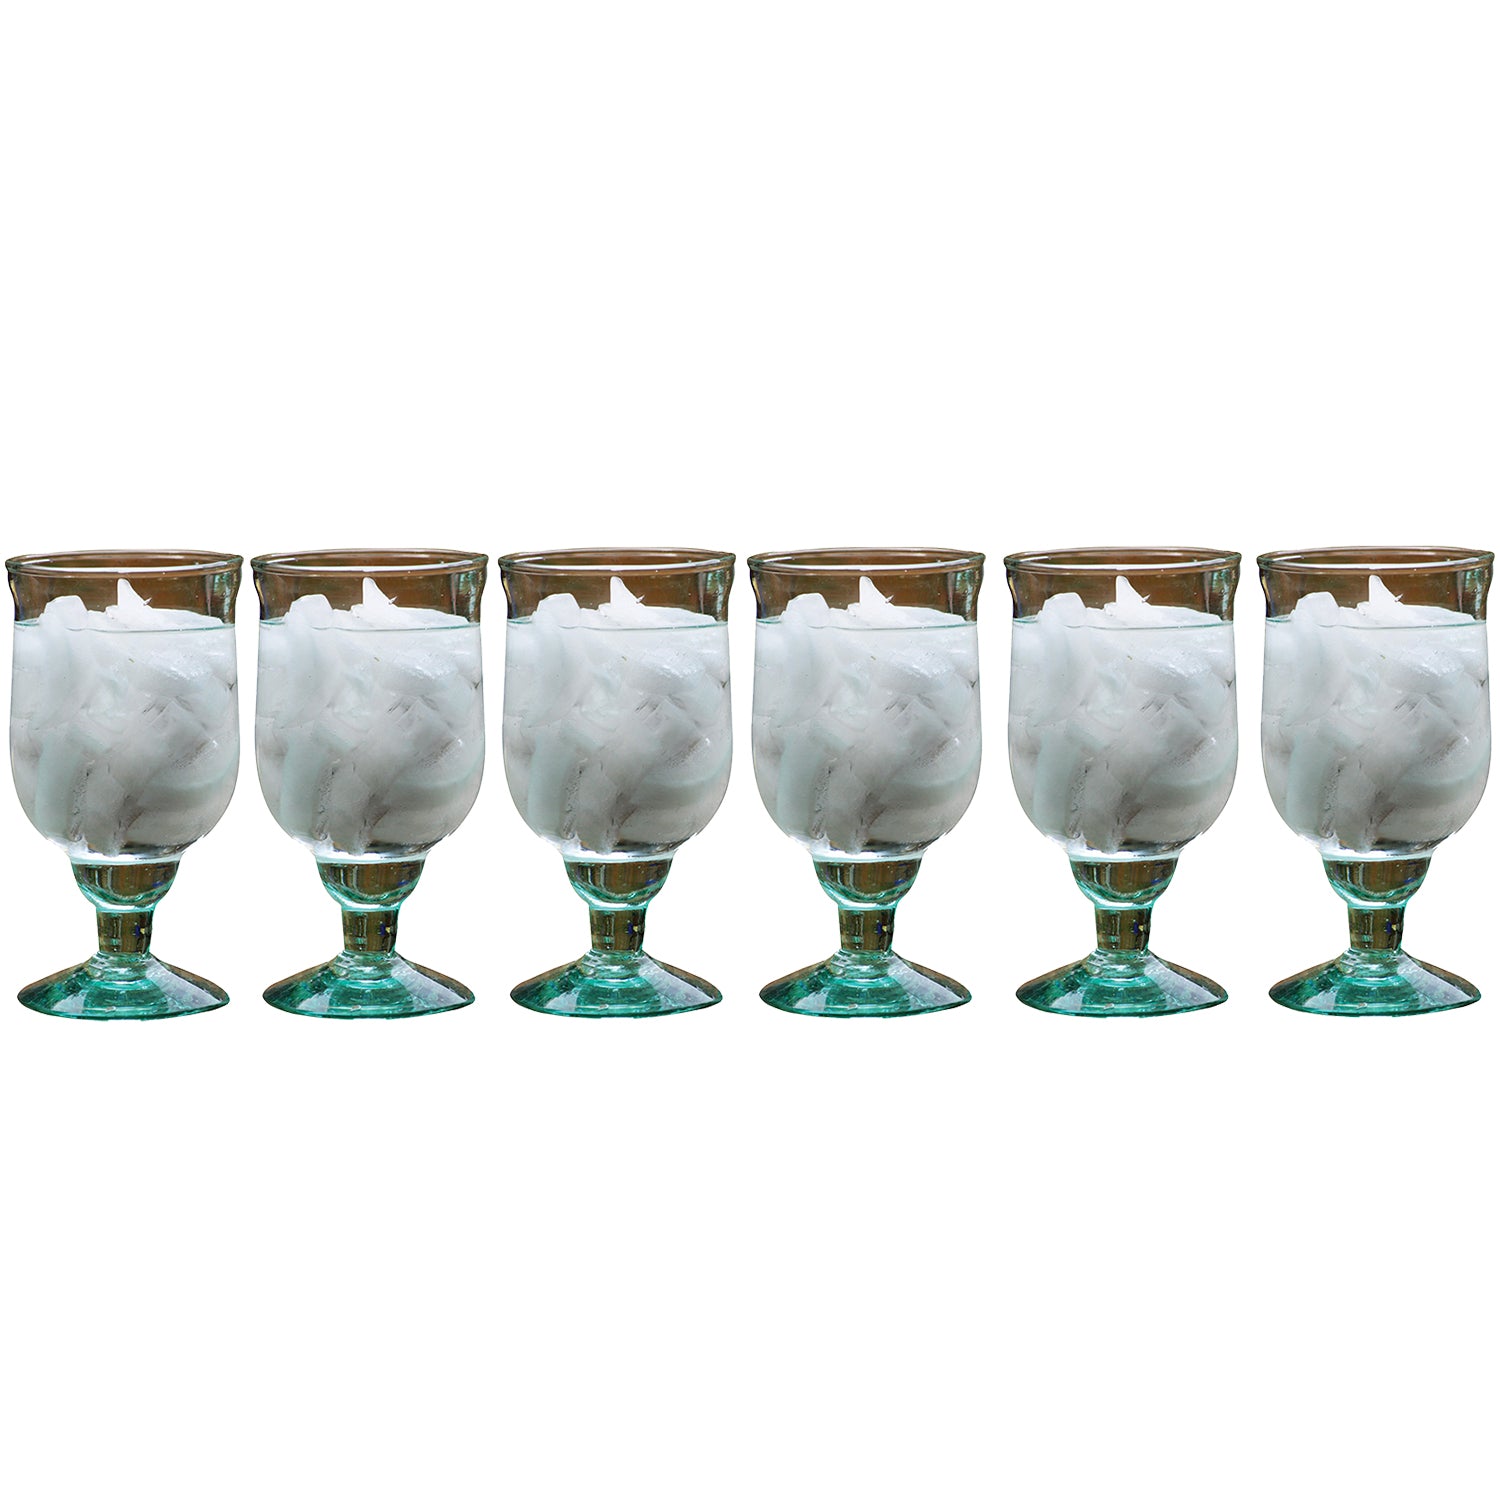 Large Blown Glass Water Goblets - Set of 6